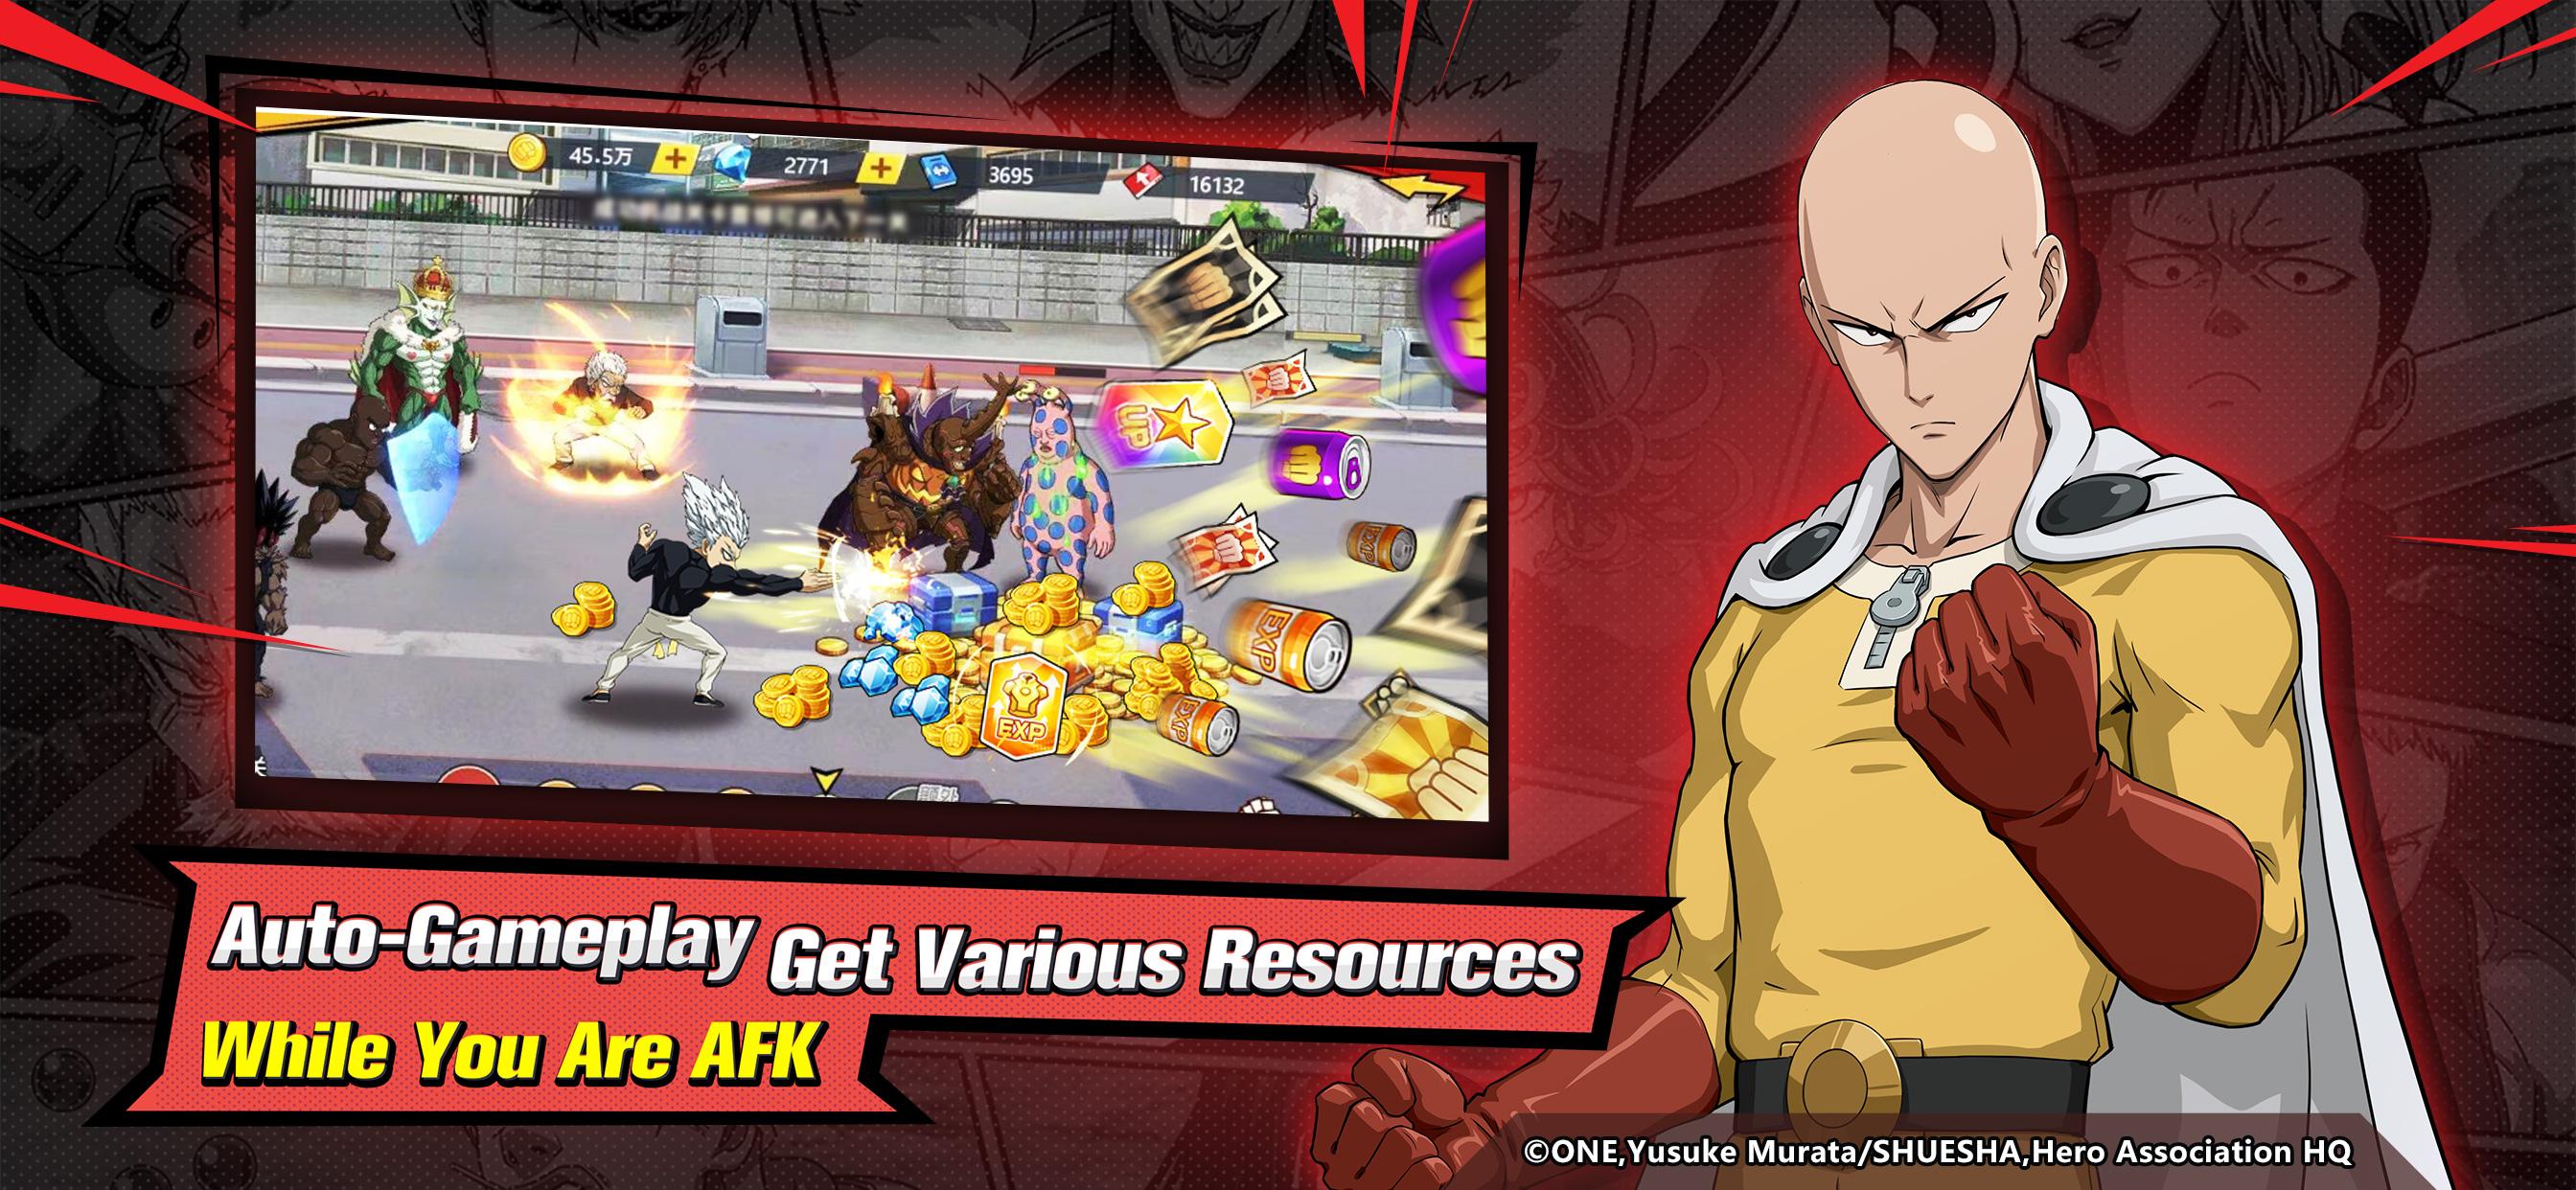 ONE PUNCH MAN: The Strongest (Authorized) 1.2.2 Screenshot 20